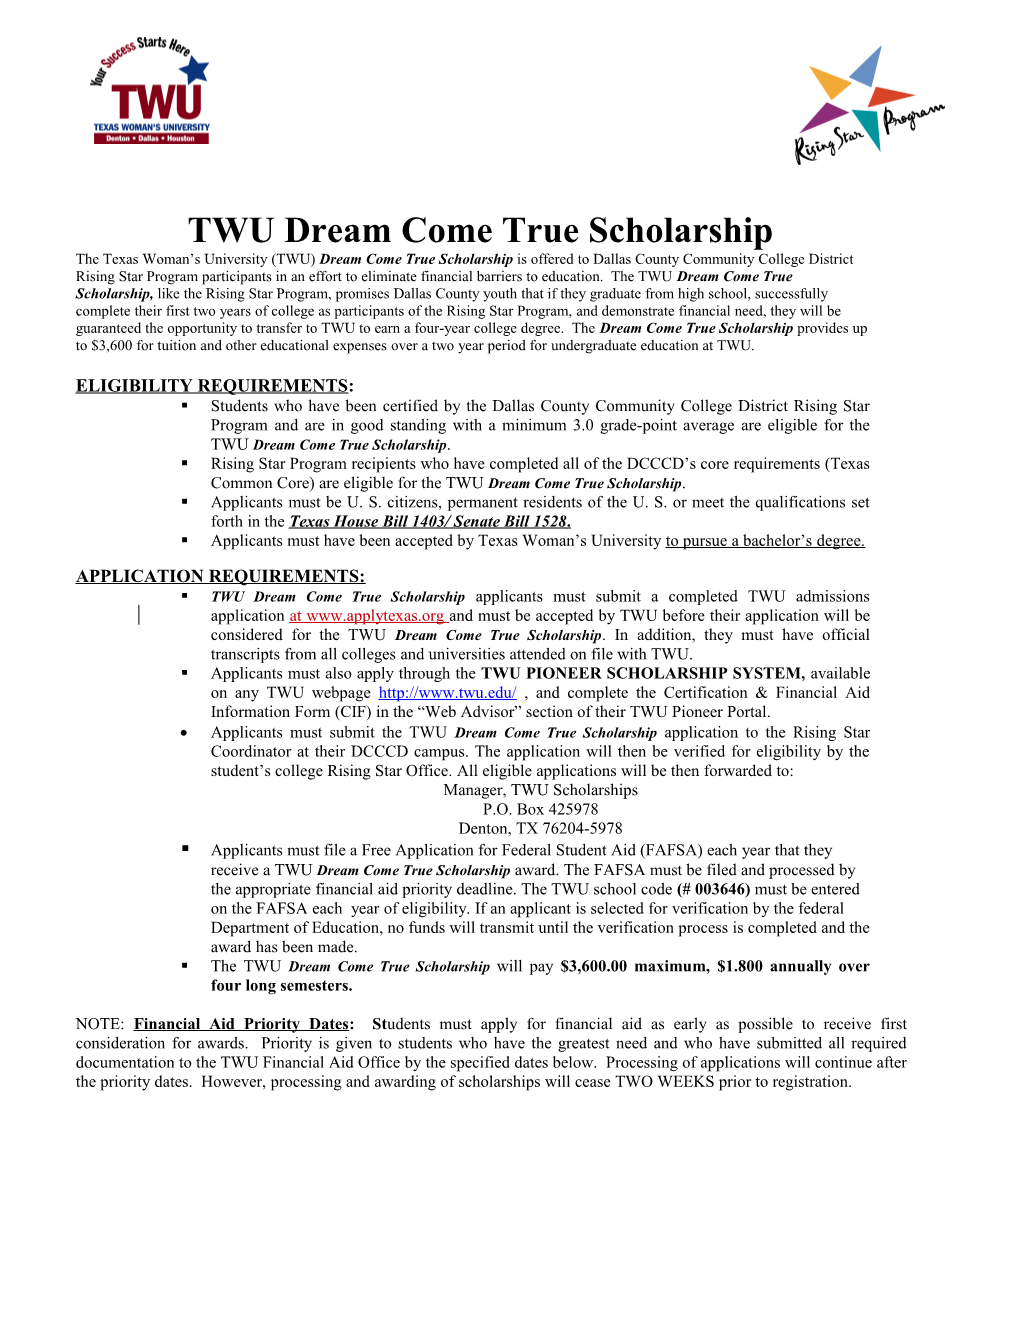 Complete the Dream Scholarship